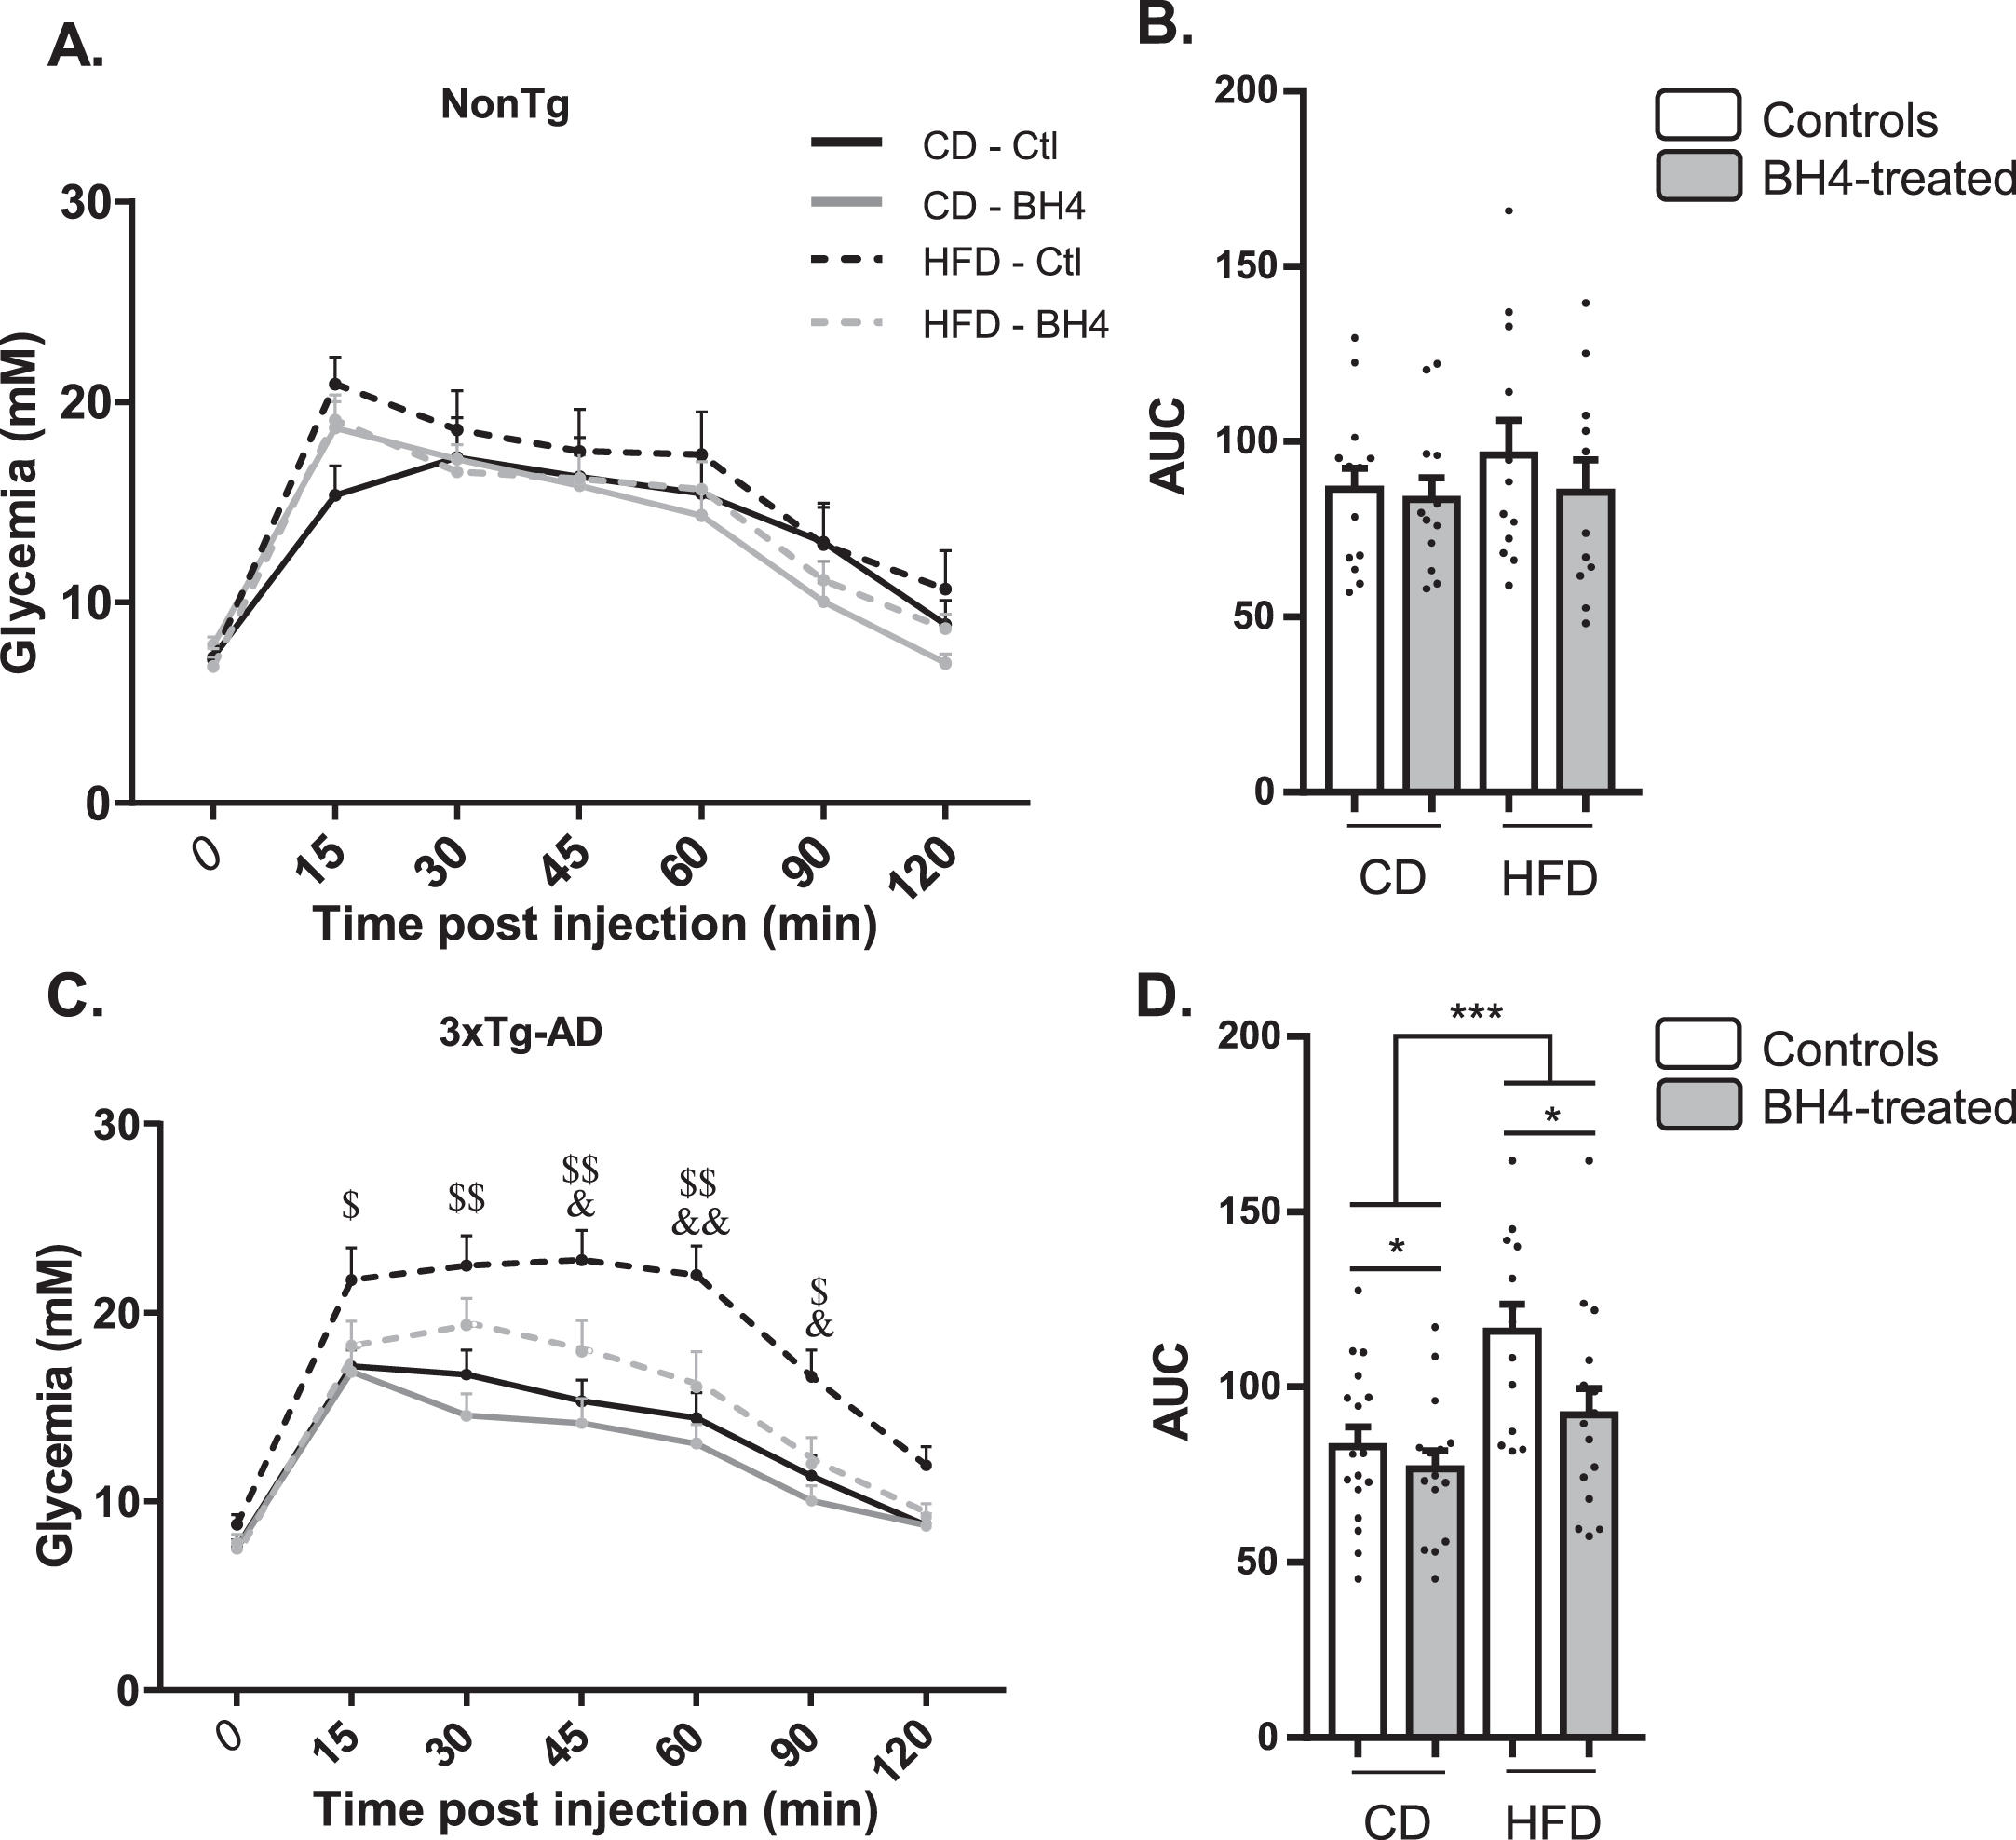 BH4 administration improves glucose tolerance in 3xTg-AD mice. Glucose tolerance in response to the intraperitoneal administration of glucose (i.p. 1 g/kg) in fasted NonTg (A, B) and 3xTg-AD mice (C, D). B–D) Area under the curves (AUC) from t = 0 to t = 120 min is represented for all groups. Values shown are glycemia (mM) or AUC (mM/min), expressed as mean±SEM with N = 11–17/group. Statistical analyses: (C) $p < 0.05, $$p < 0.01 for each time point, significantly different between CD and HFD in Ctl mice; &p < 0.05, &&p < 0.01 for each time point, significantly different between BH4 treated and Ctl mice under HFD; (D) *p < 0.05 Main BH4 Treatment effect; ***p < 0.001 Main Diet effect (Multimodal ANOVA).